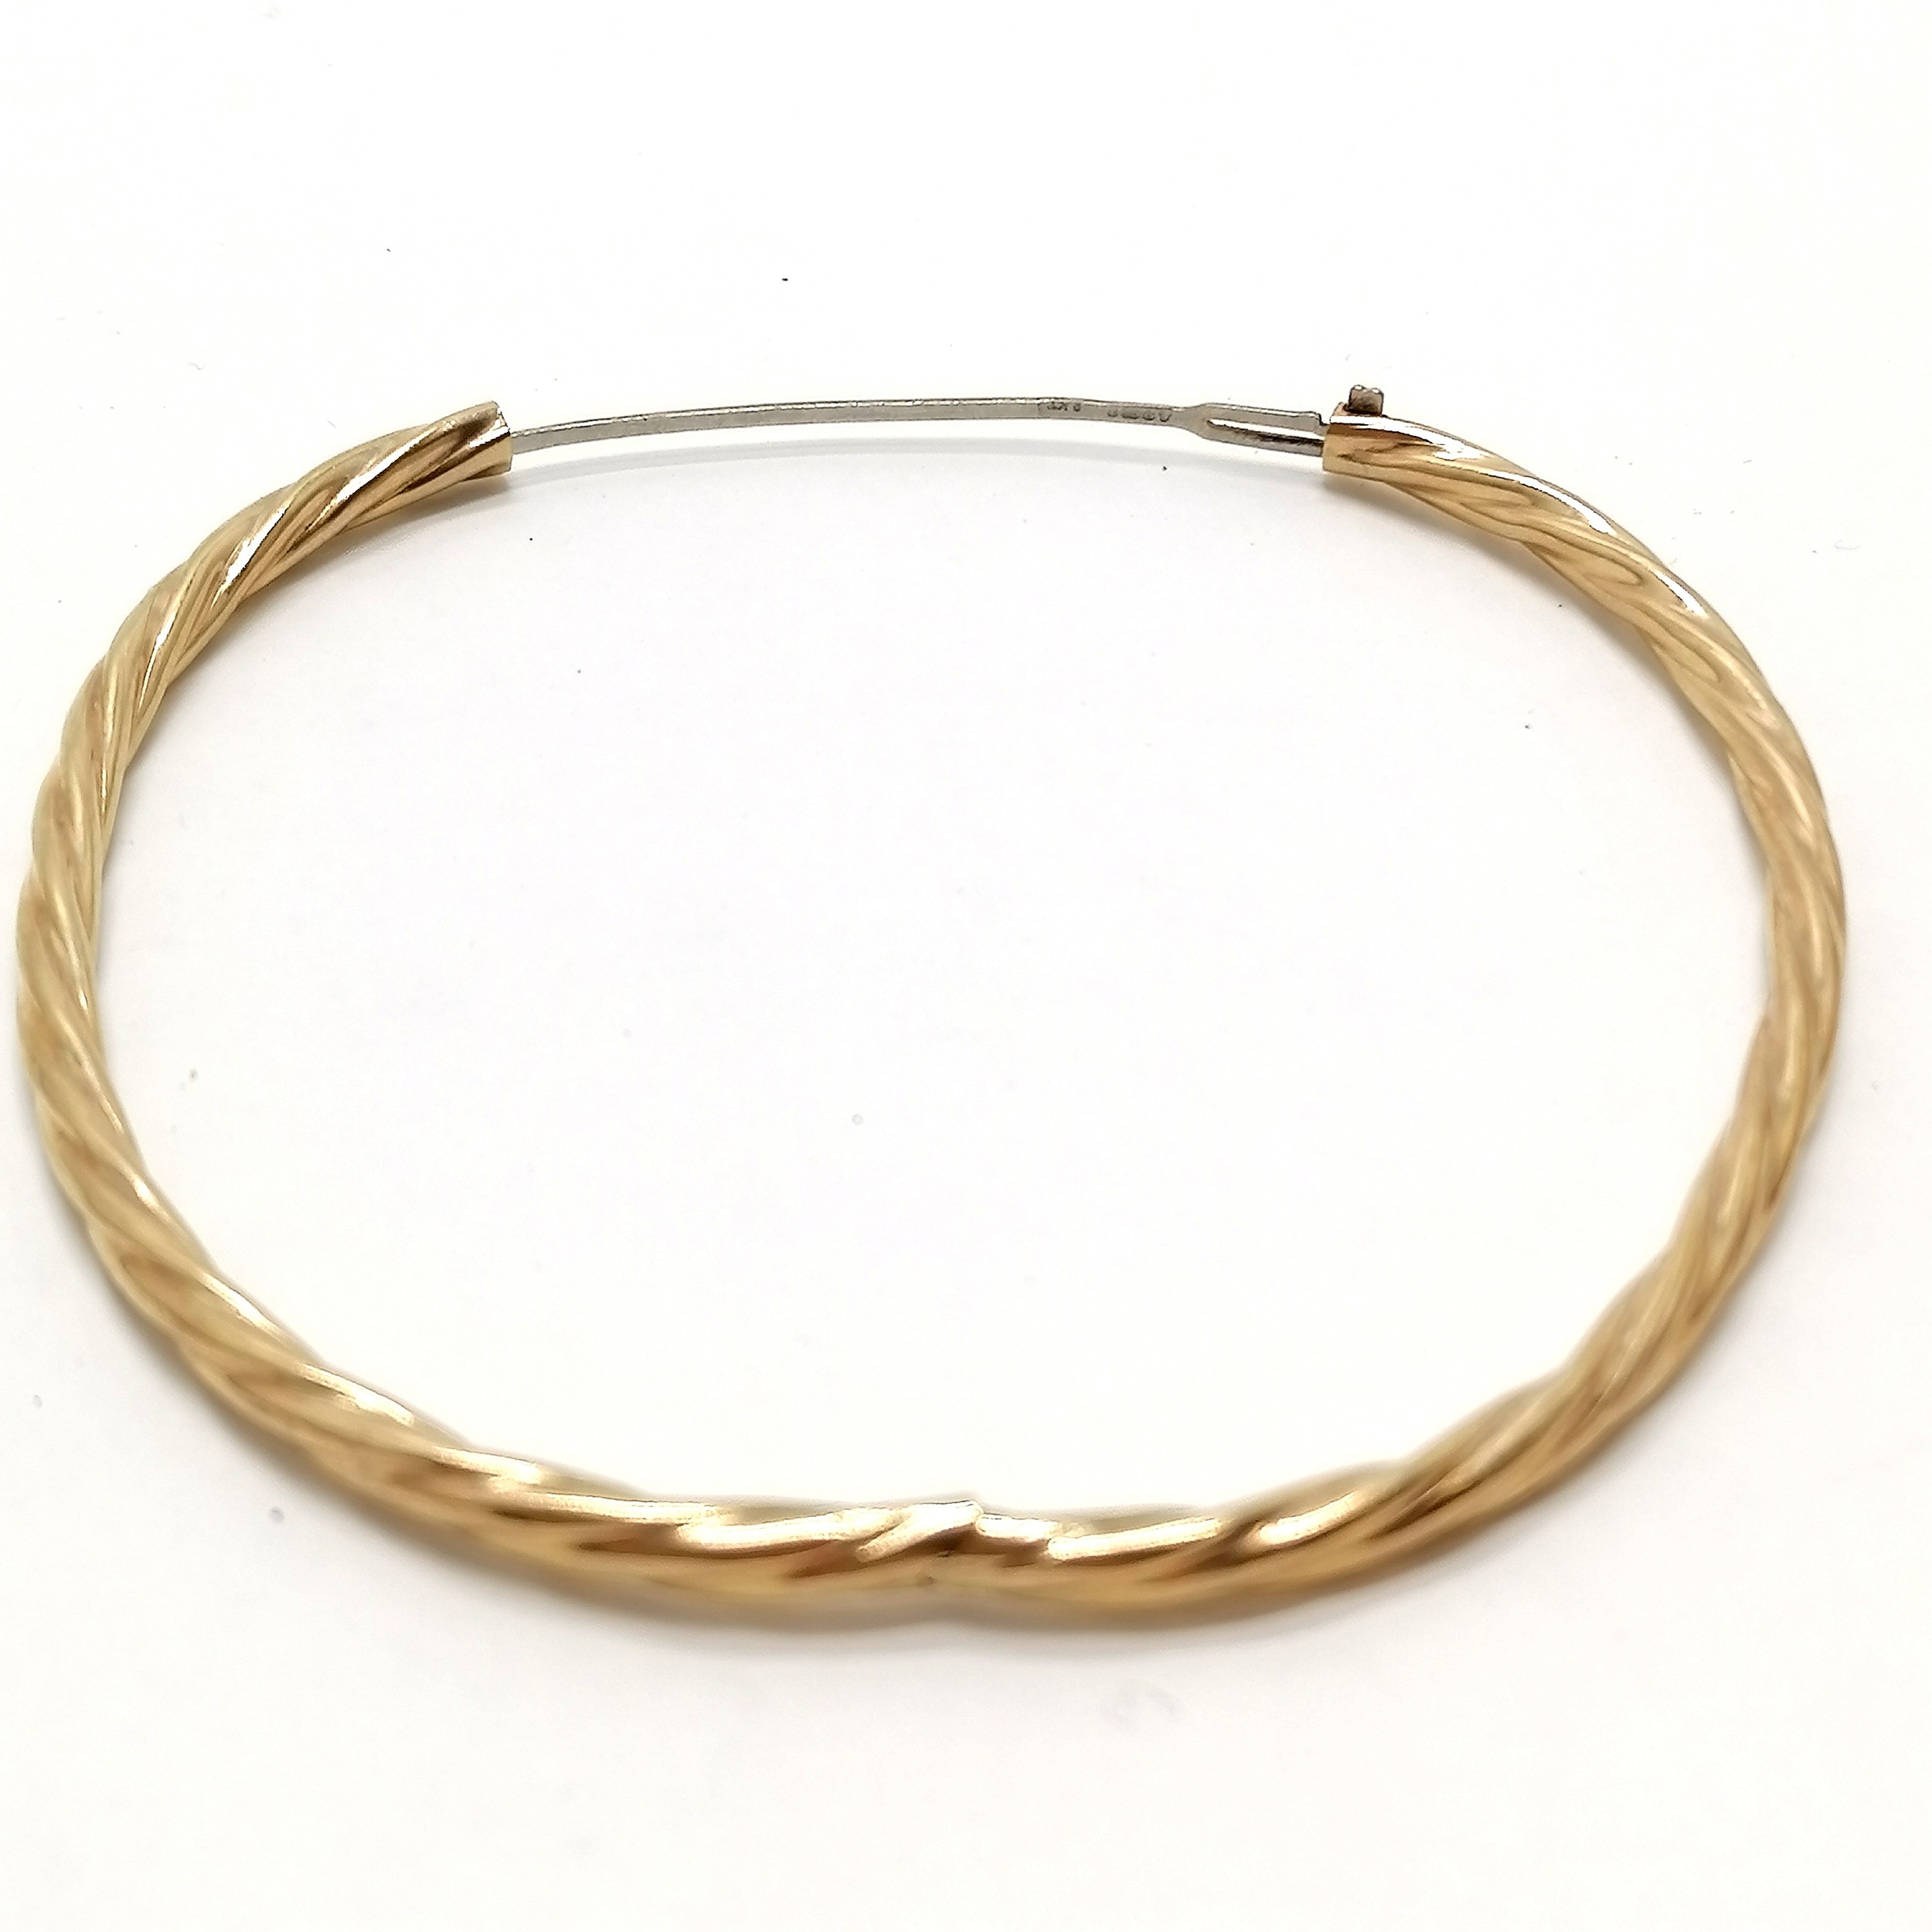 9ct hallmarked gold rope twist bangle with extending white gold mechanism - 4.5g - SOLD ON BEHALF OF - Image 2 of 2